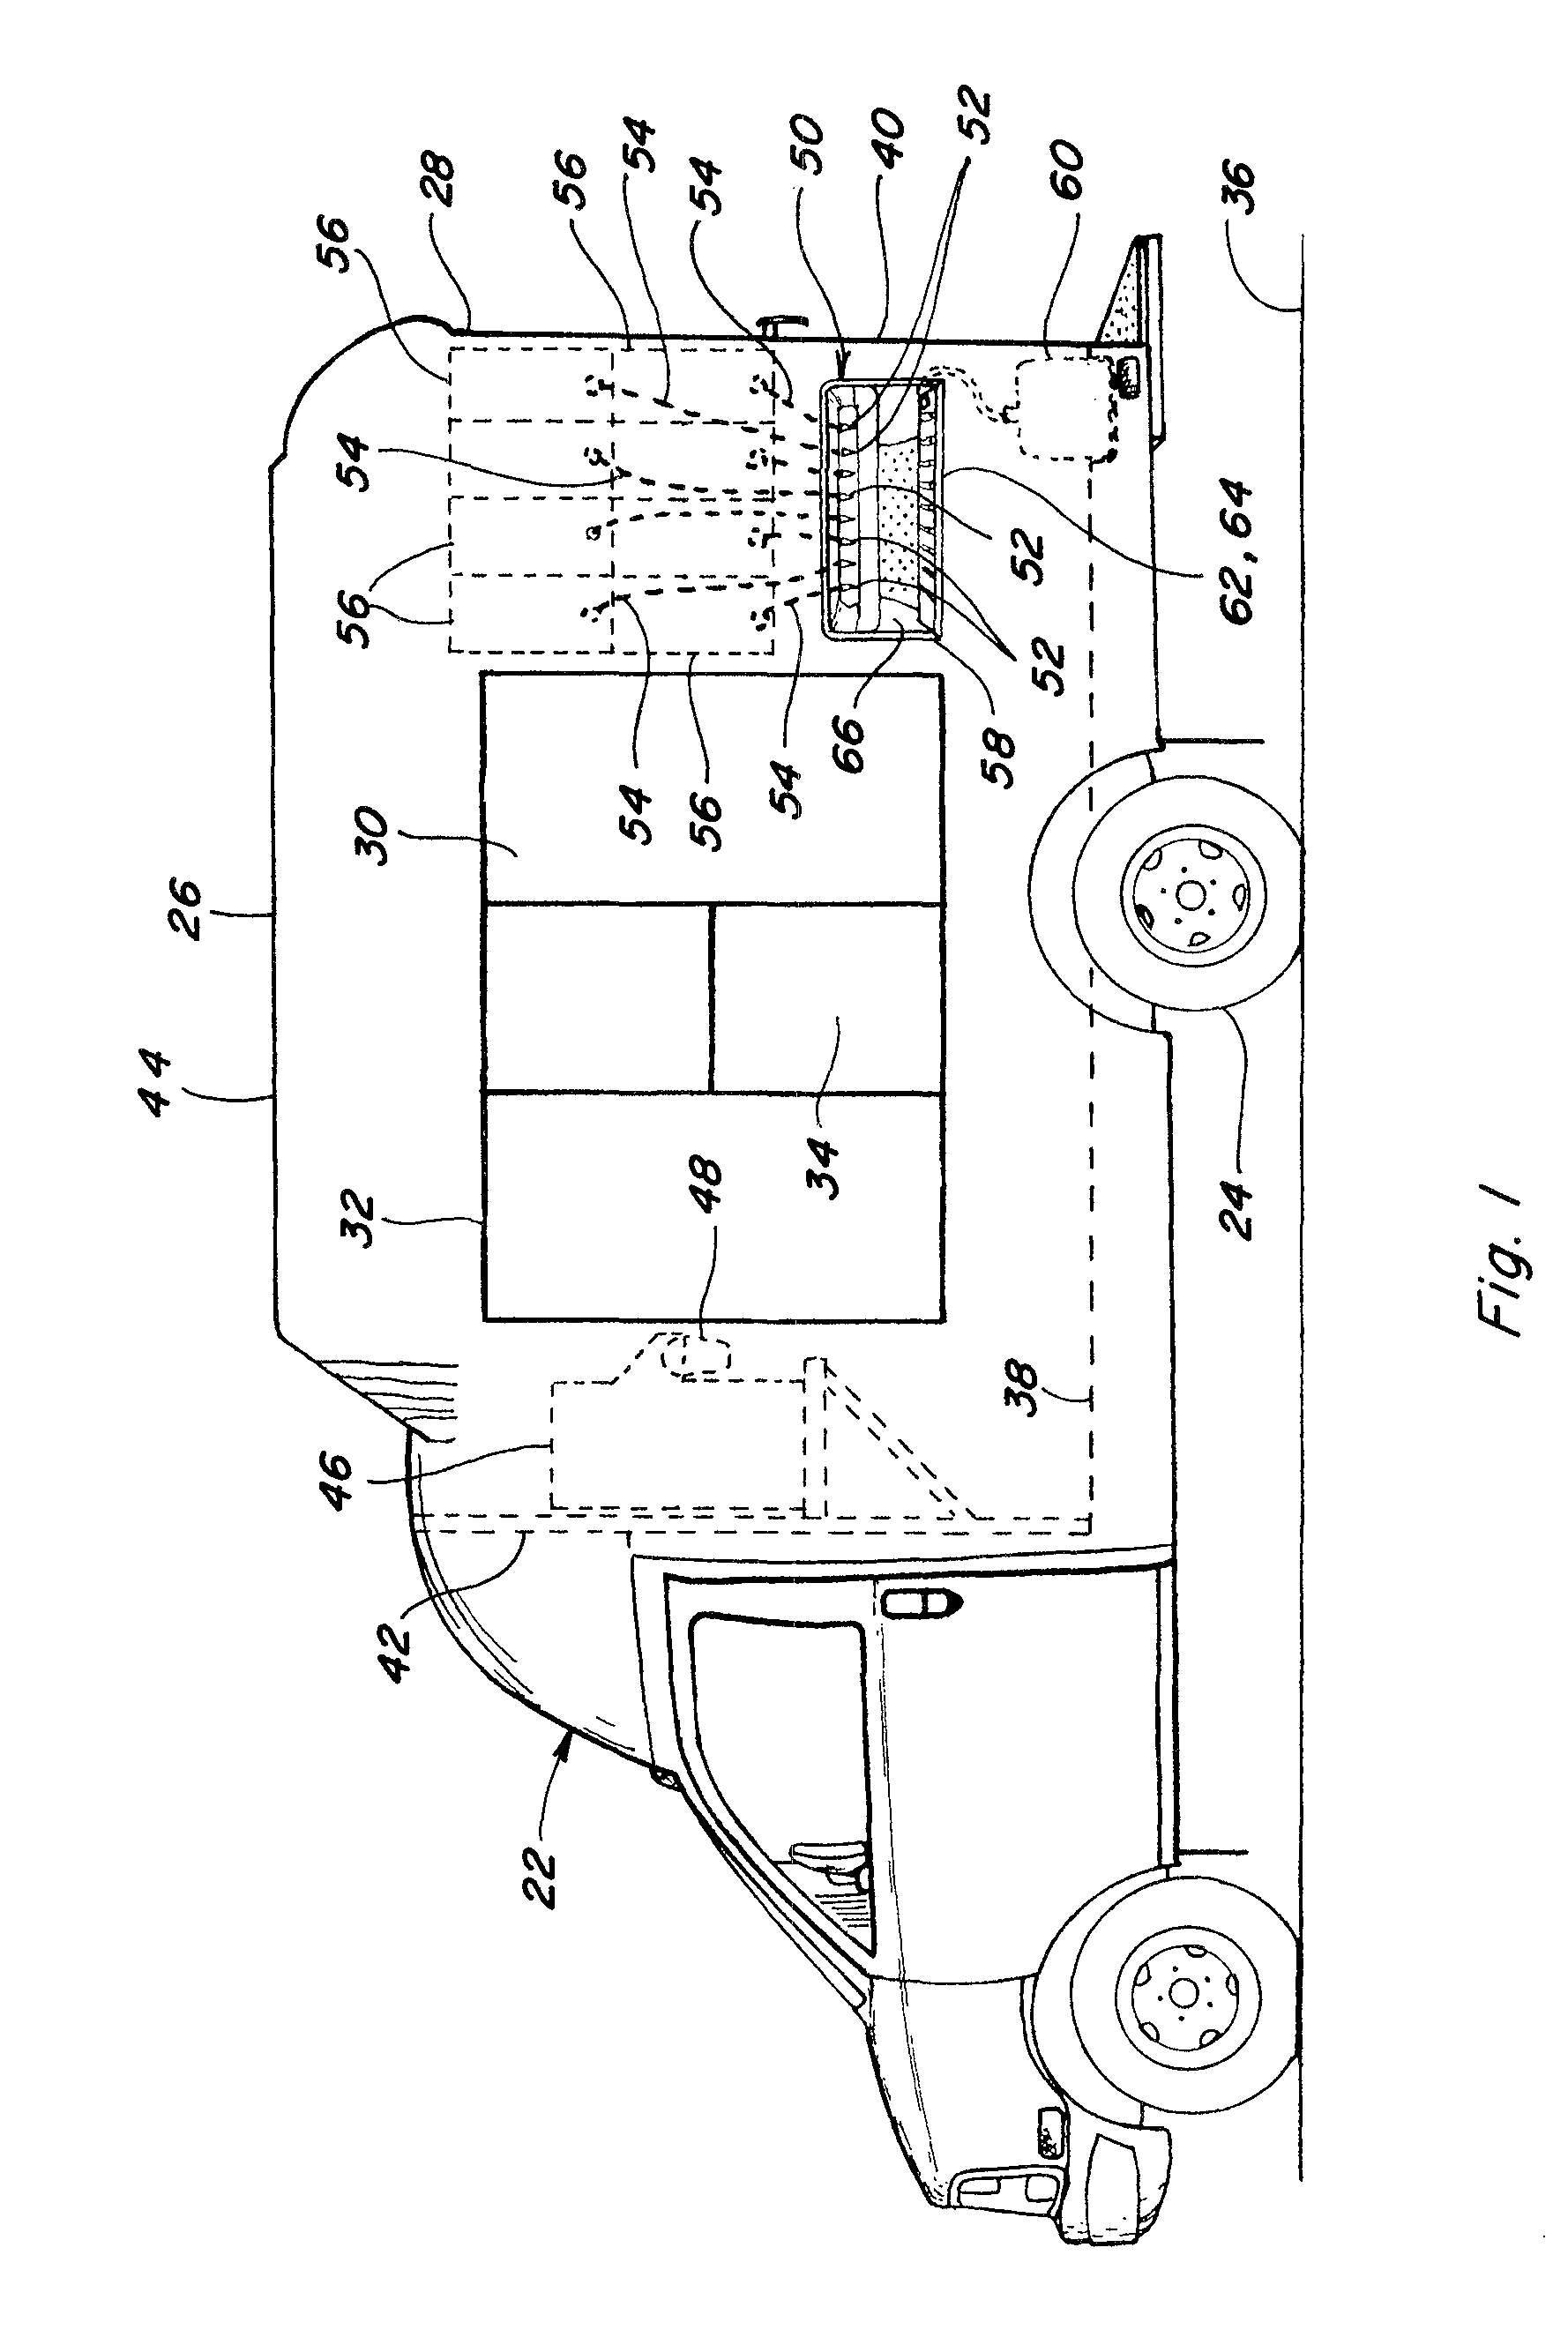 Mobile confectionary apparatus with protectible dispensing system